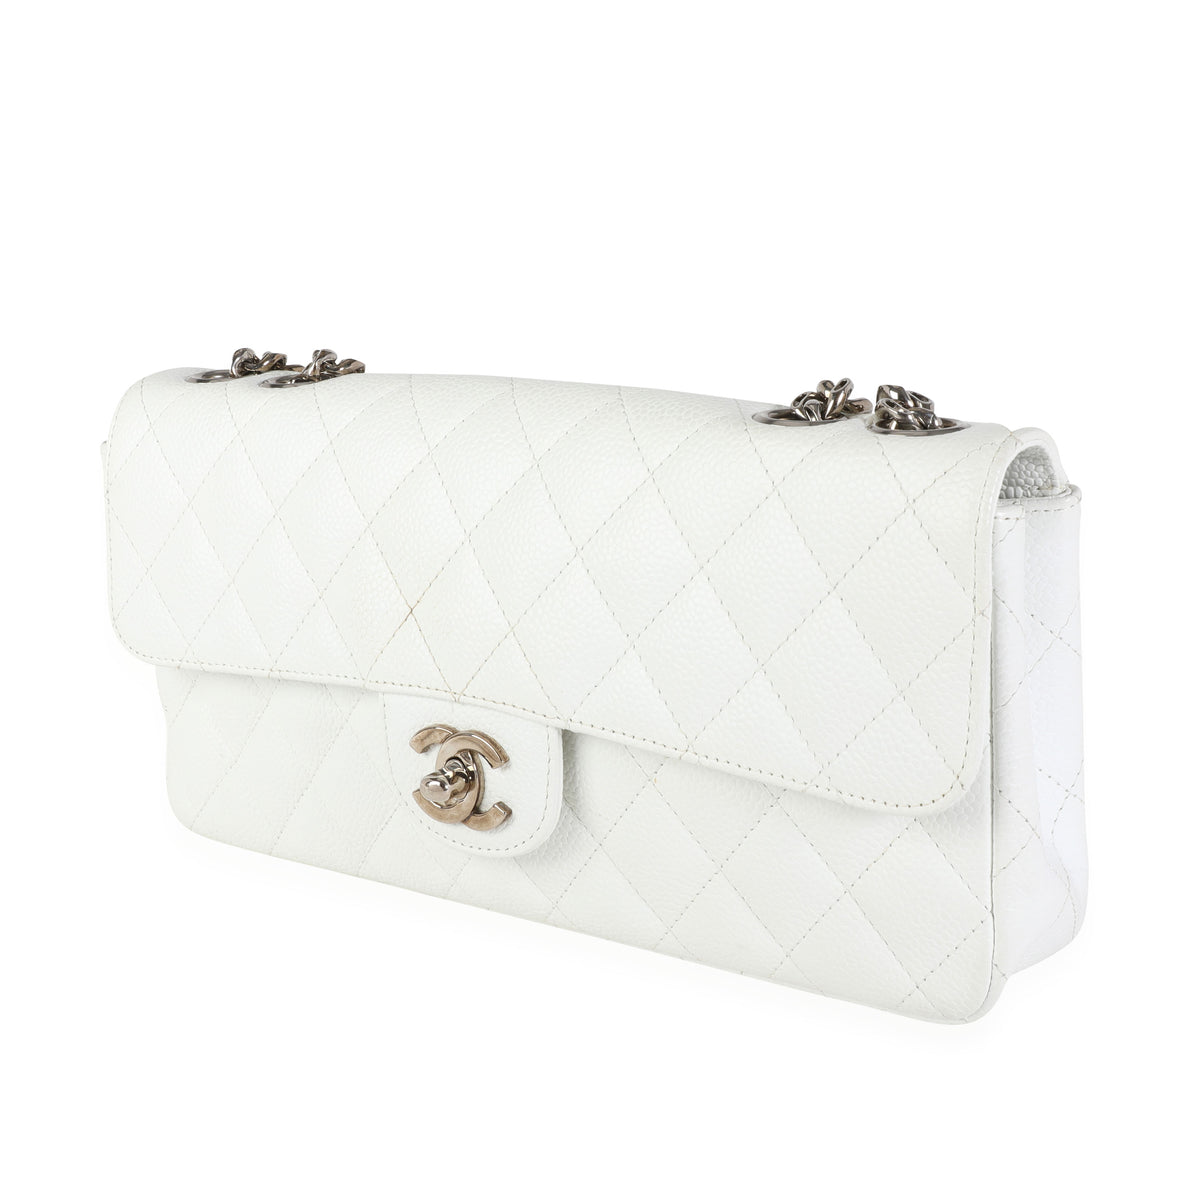 Chanel White Caviar Quilted East West Bijoux Single Flap Bag, myGemma